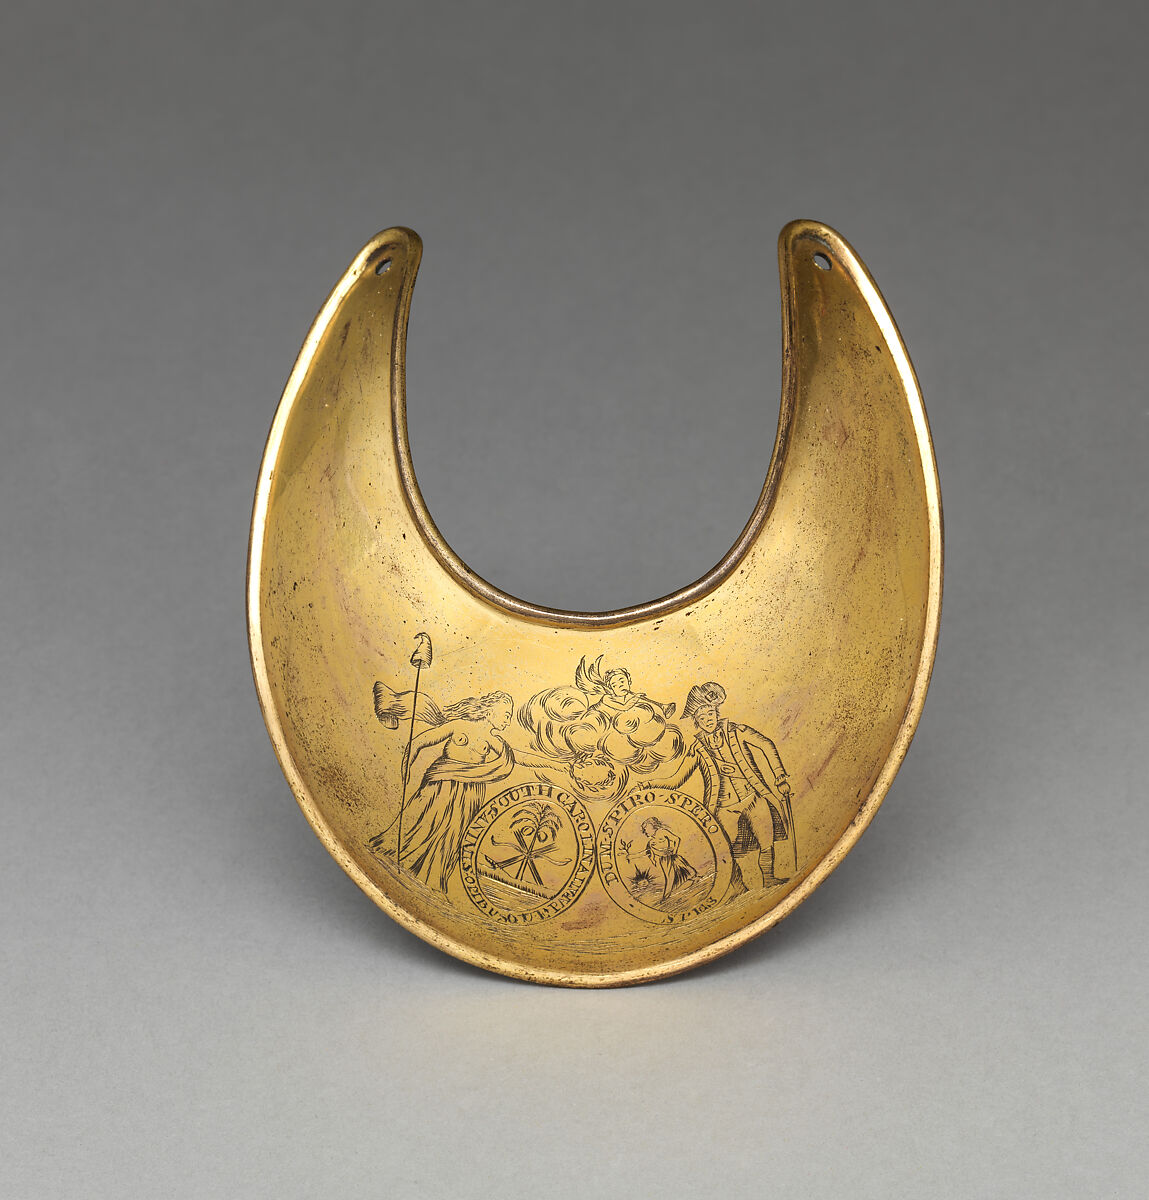 Gorget for an Officer of the South Carolina Infantry Regiment, Brass, gold, American 